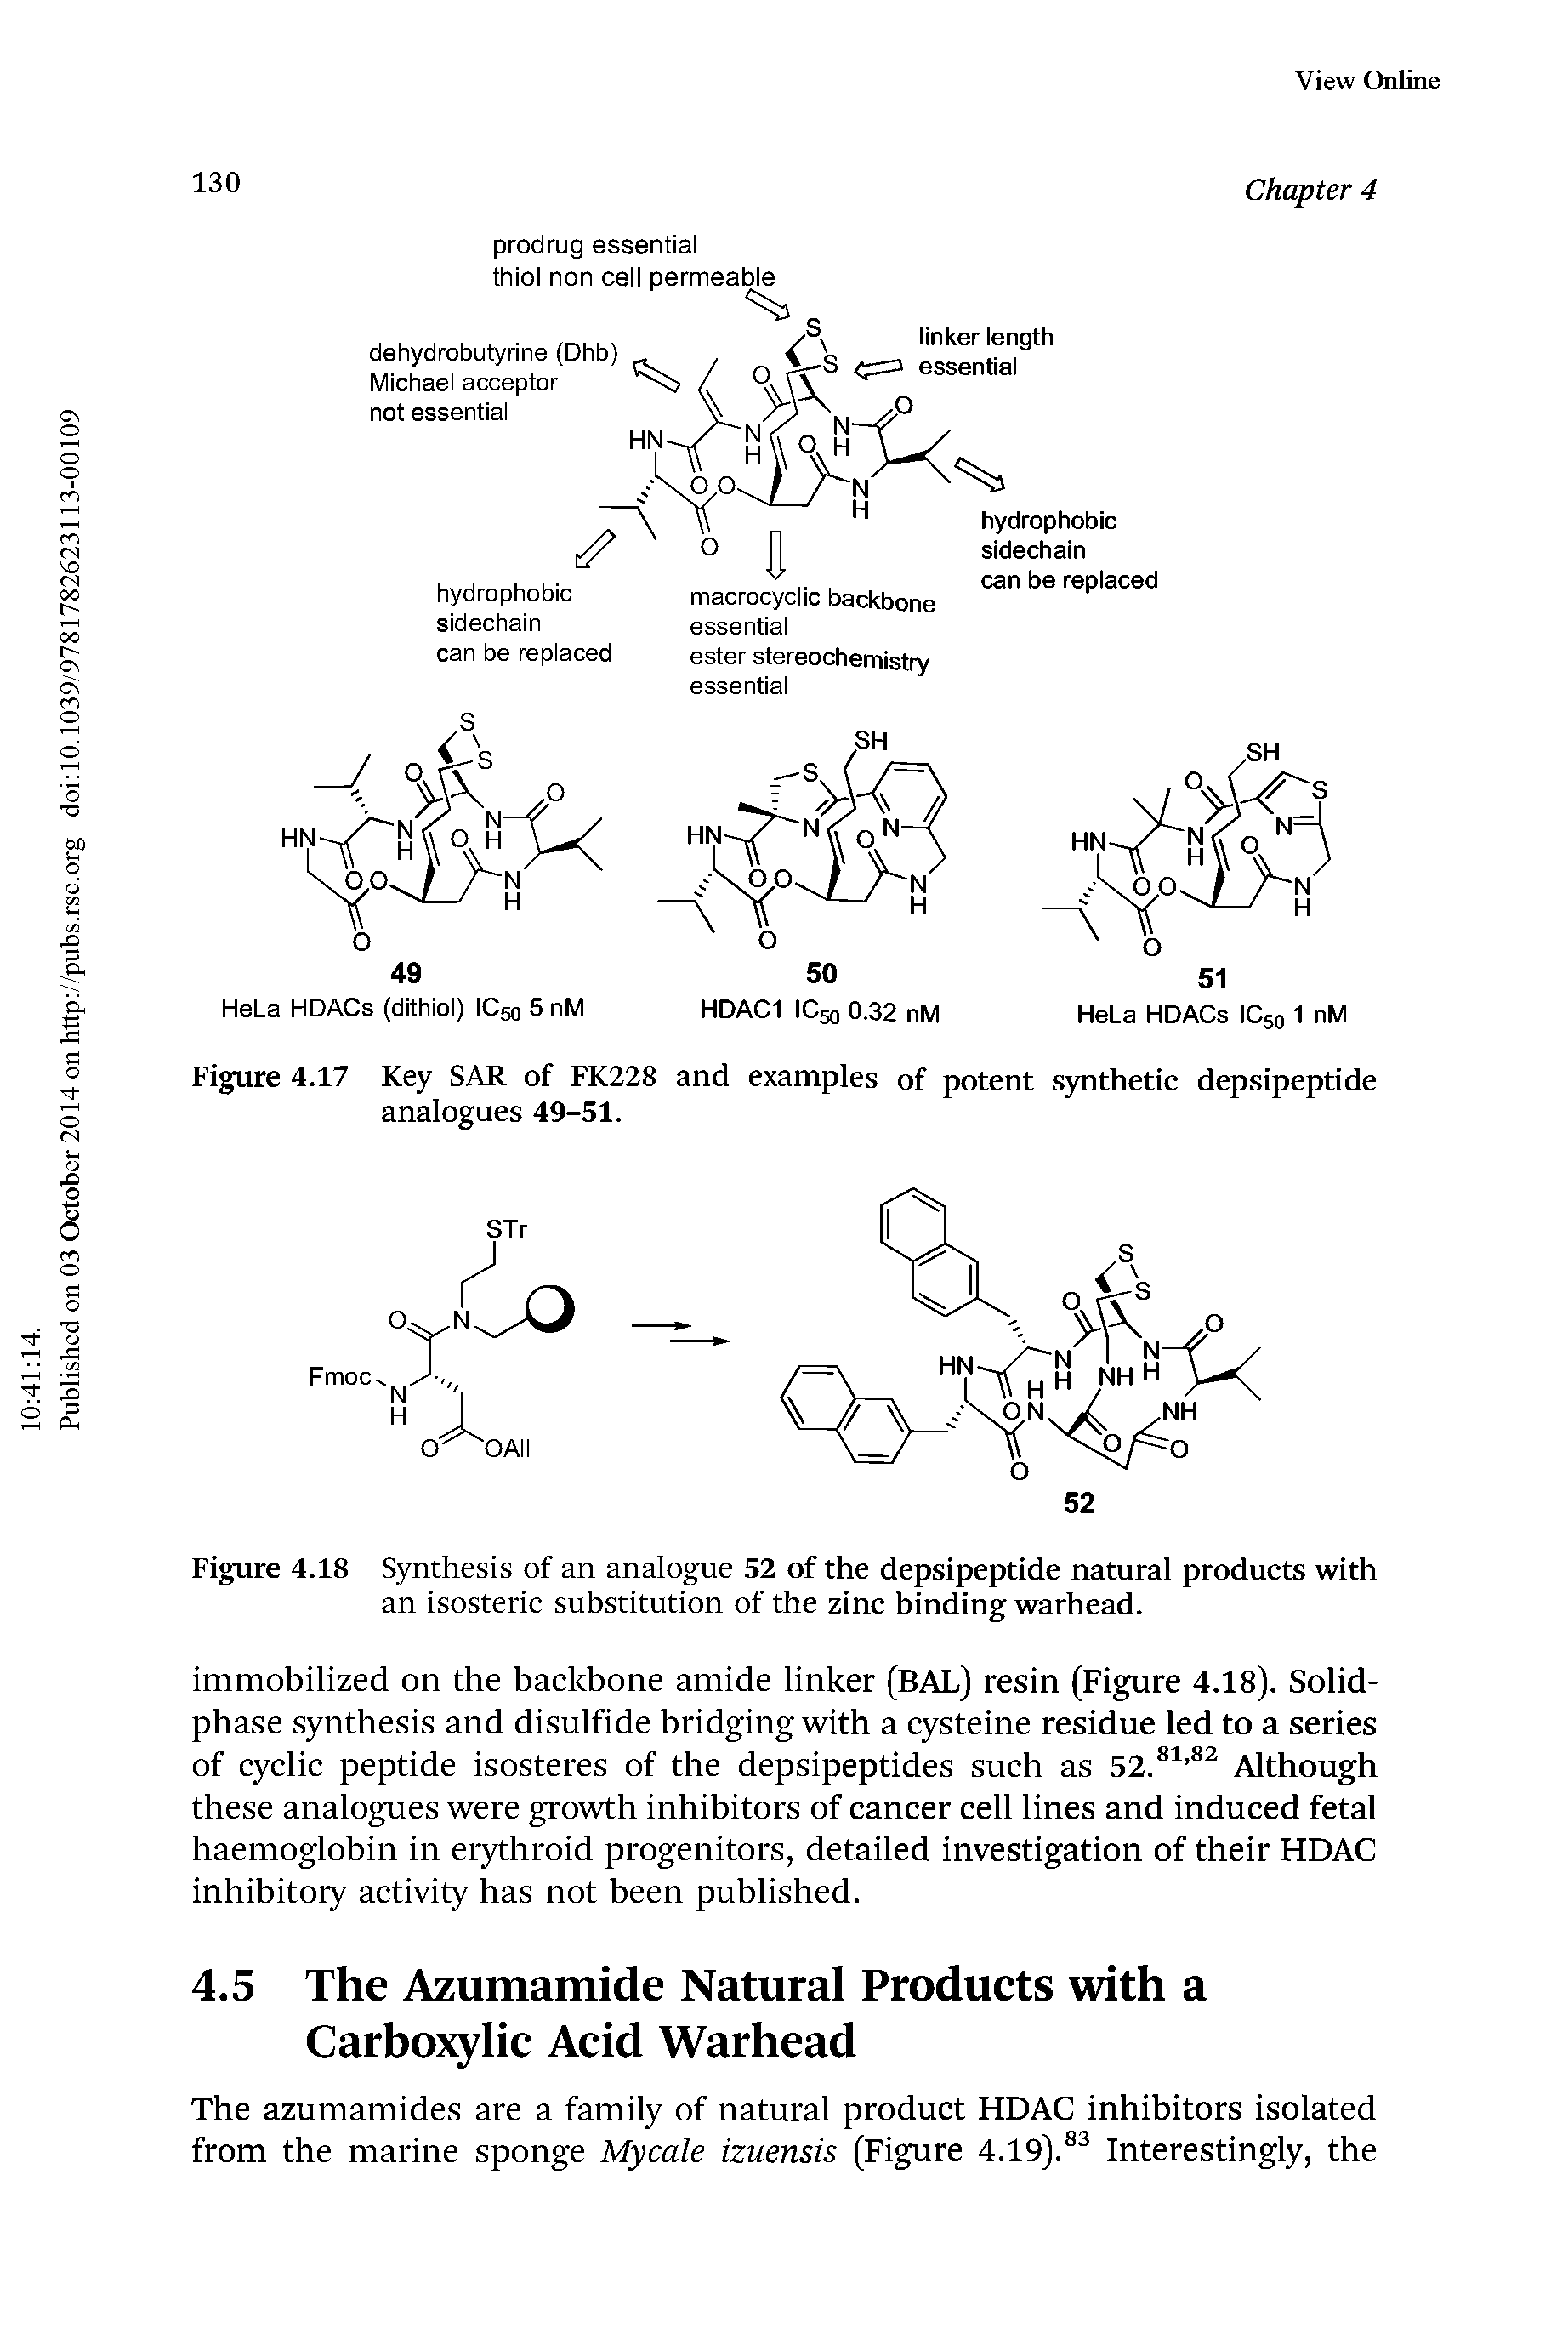 Figure 4.18 Synthesis of an analogue 52 of the depsipeptide natural products with an isosteric substitution of the zinc binding warhead.